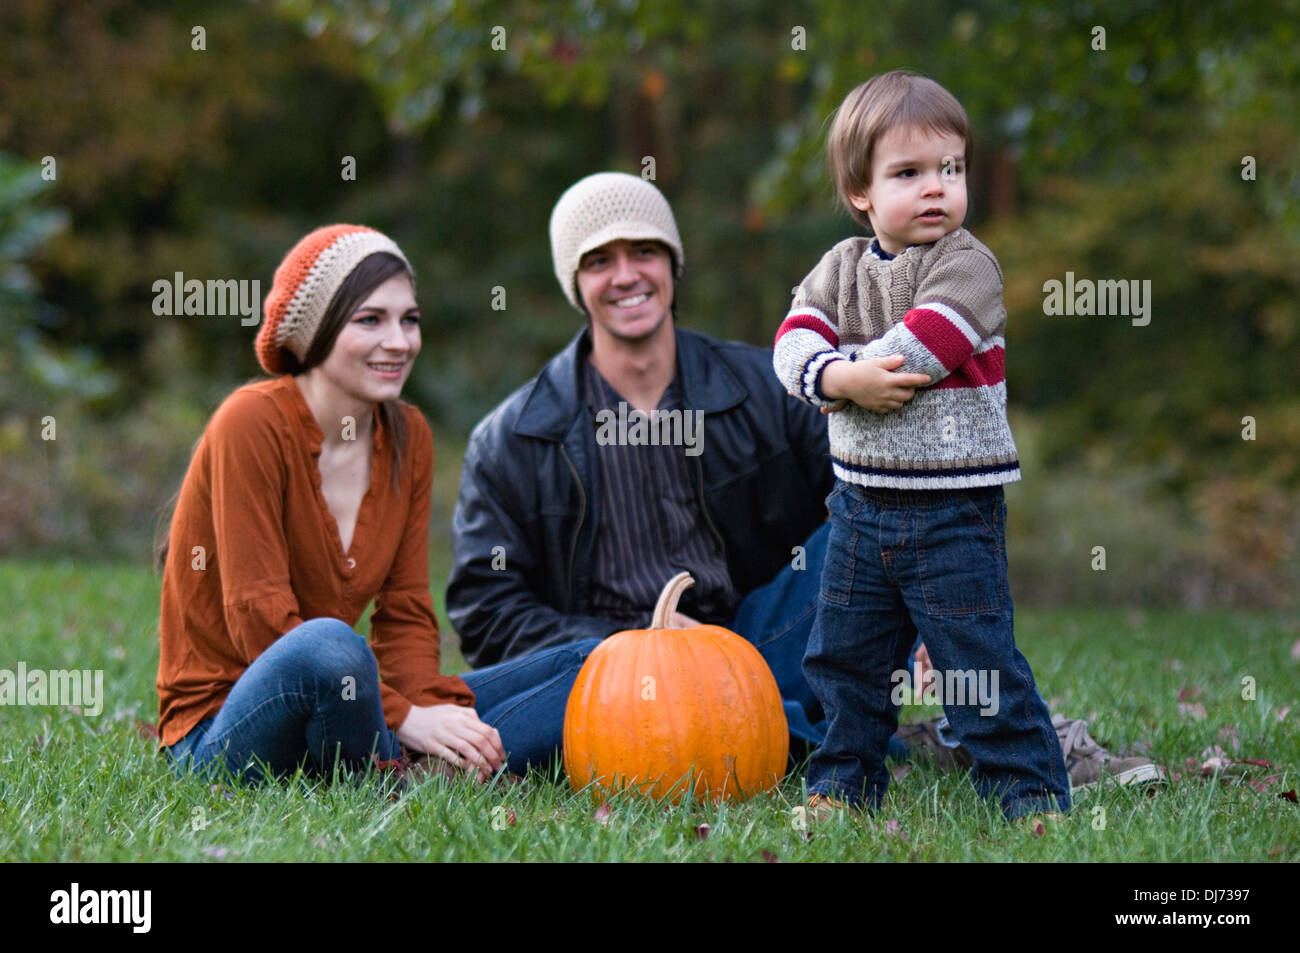 Young Family Outdoors with Pumpkin Stock Photo